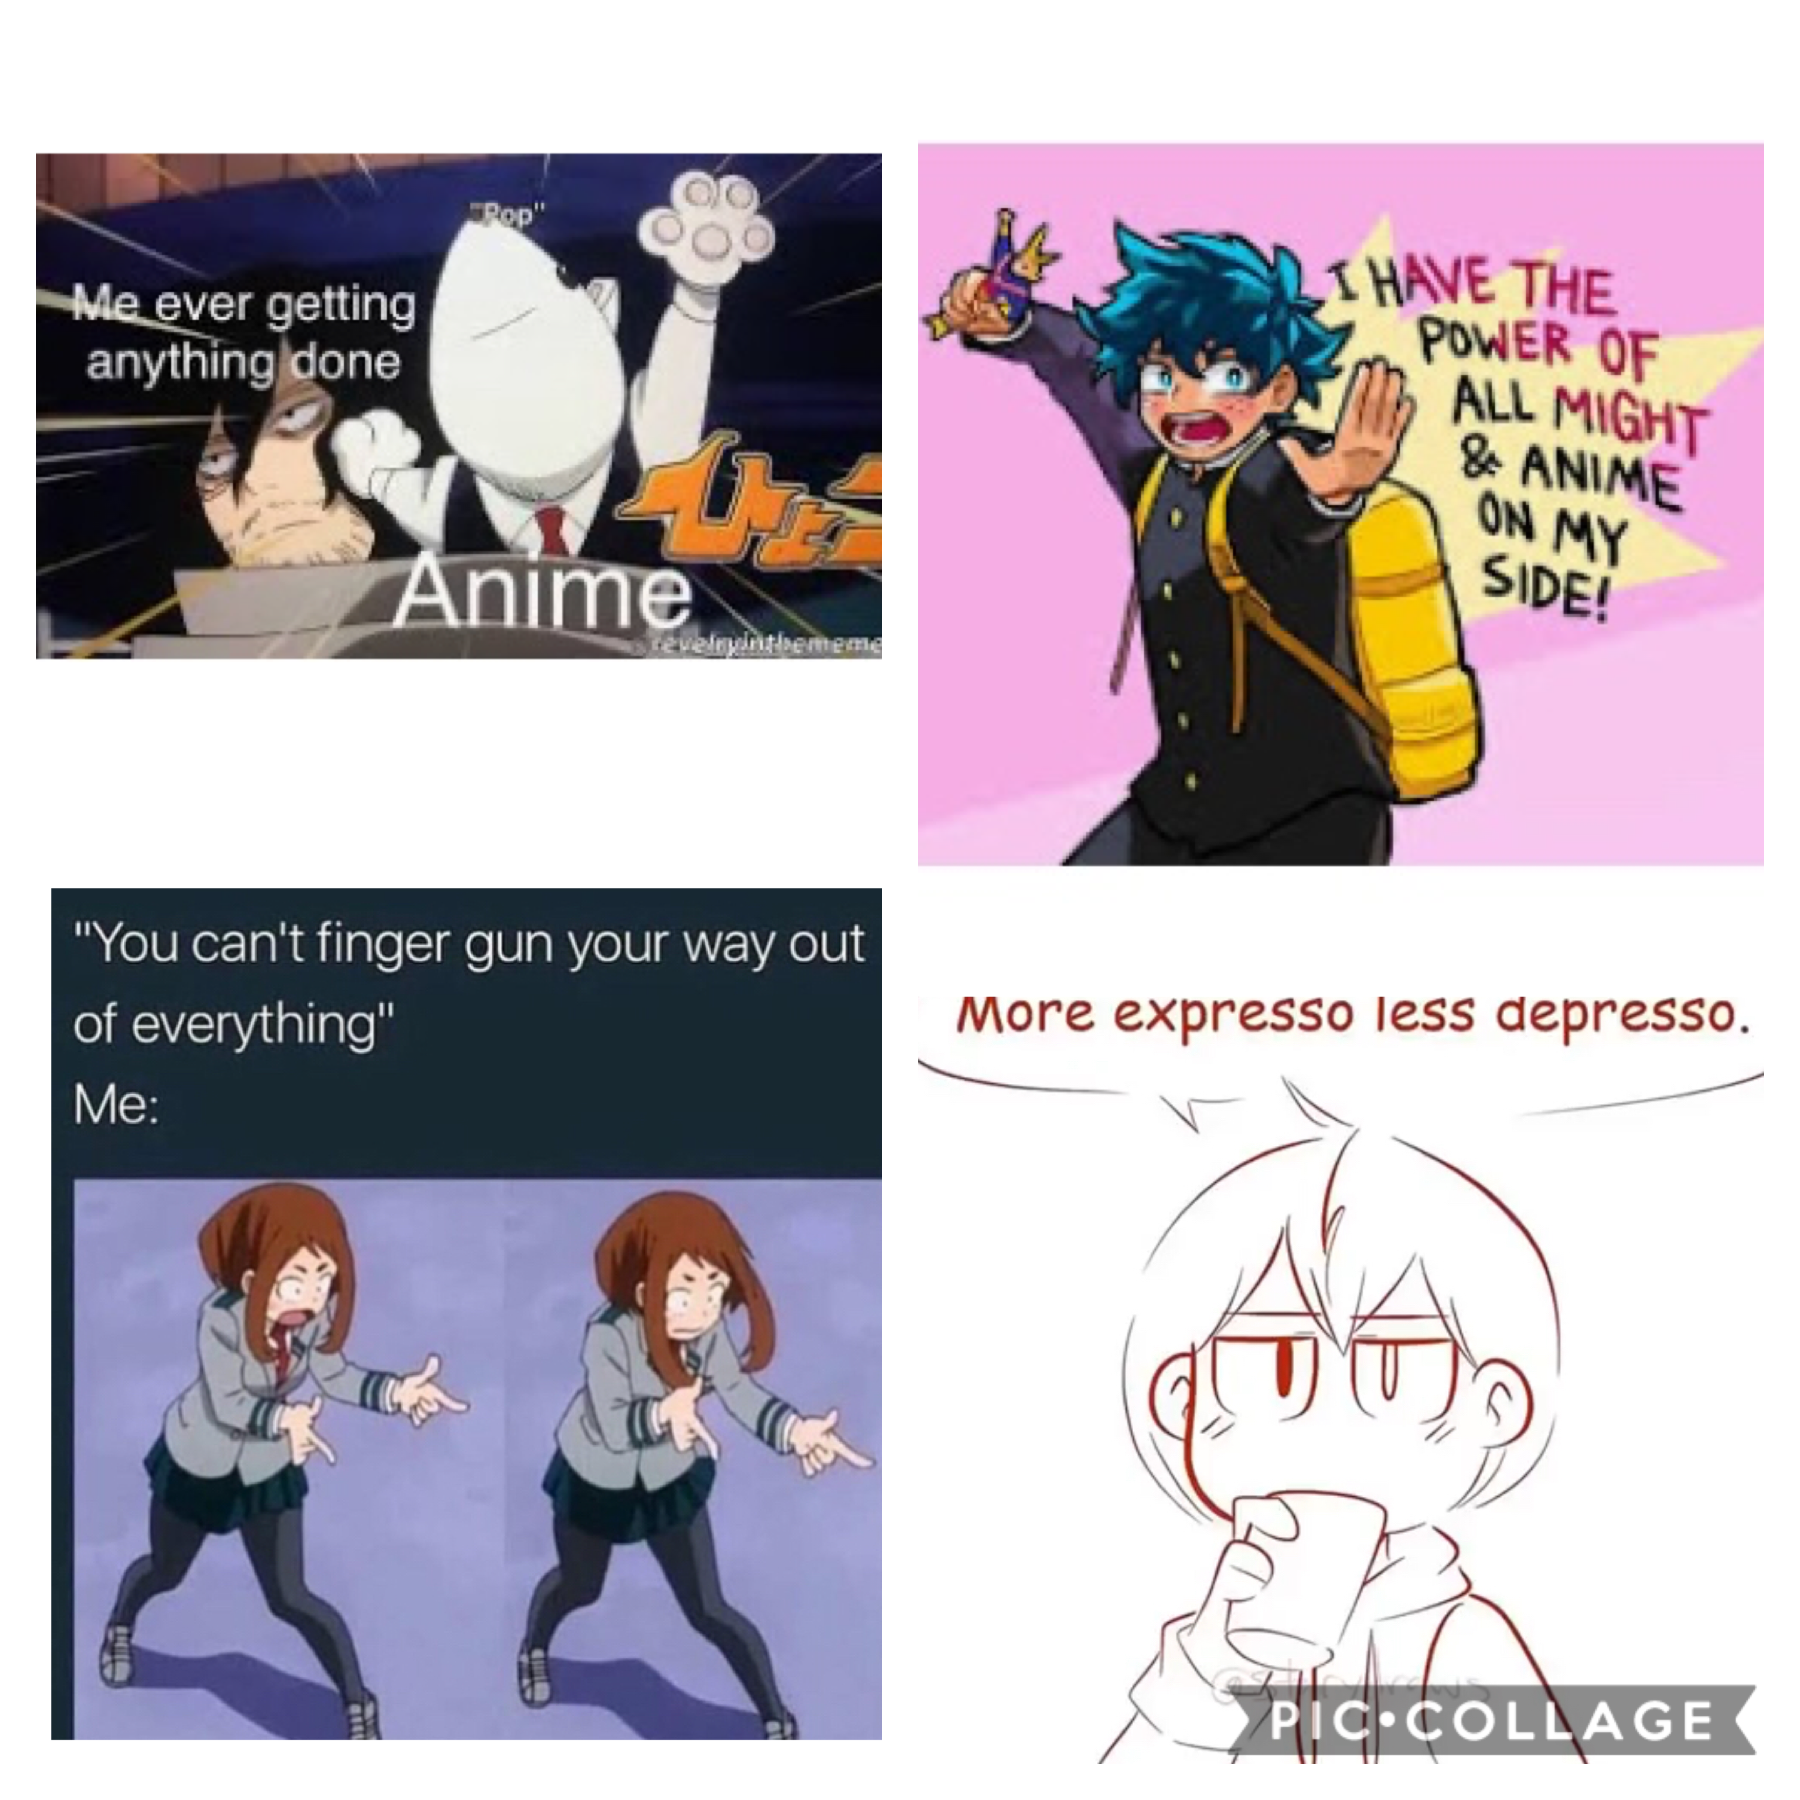 (did it post the first time?) anyways here are the memes i tried to post but wouldn’t show up. have a plus ultra day and night!